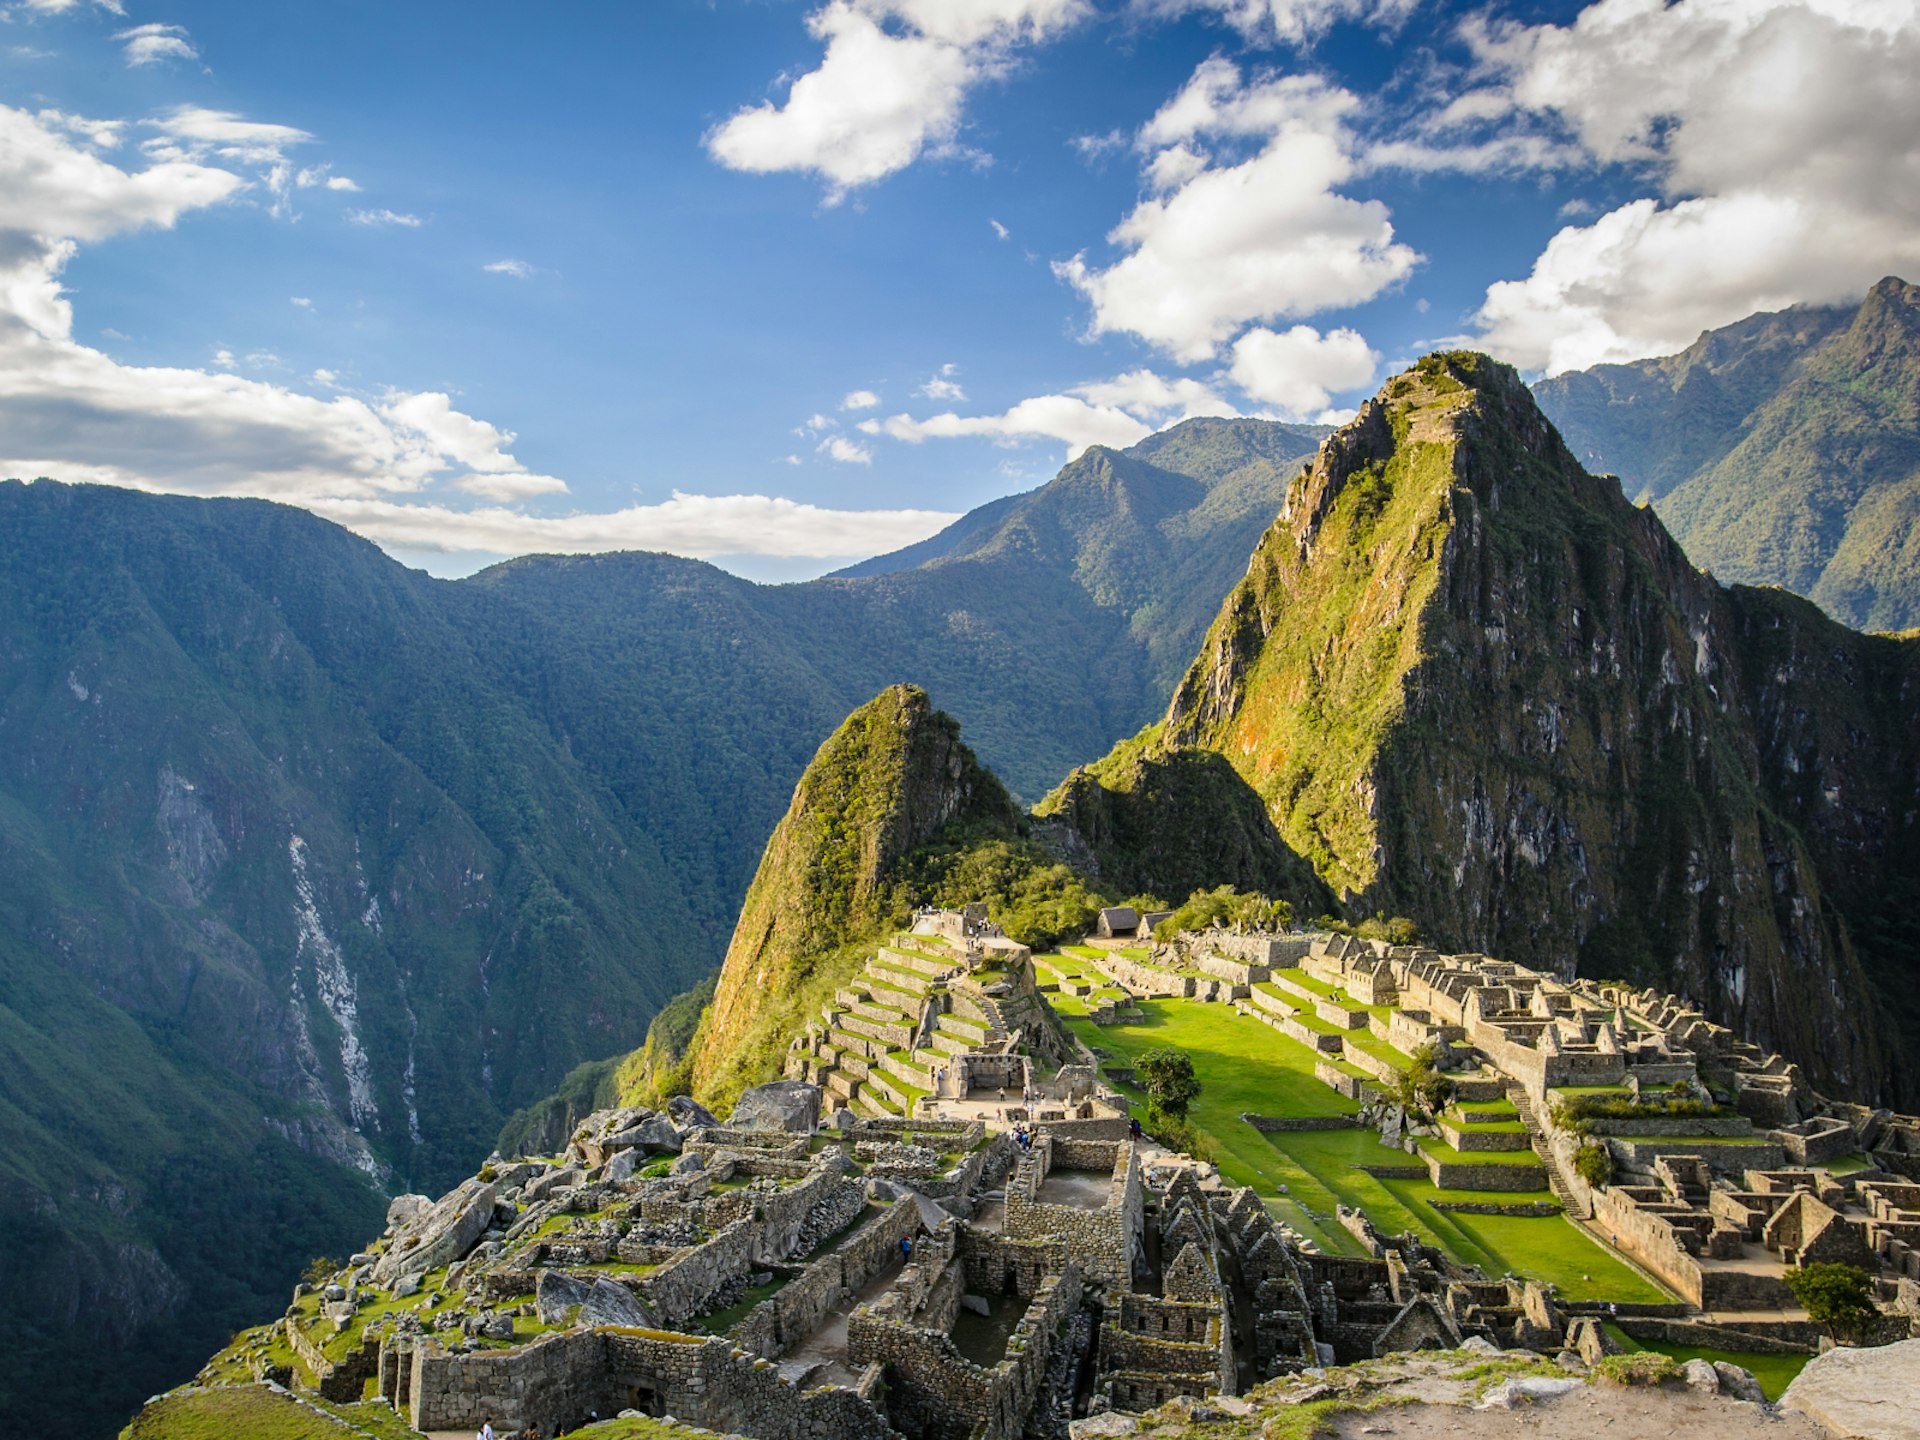 A view over the ruins of Machu Picchu